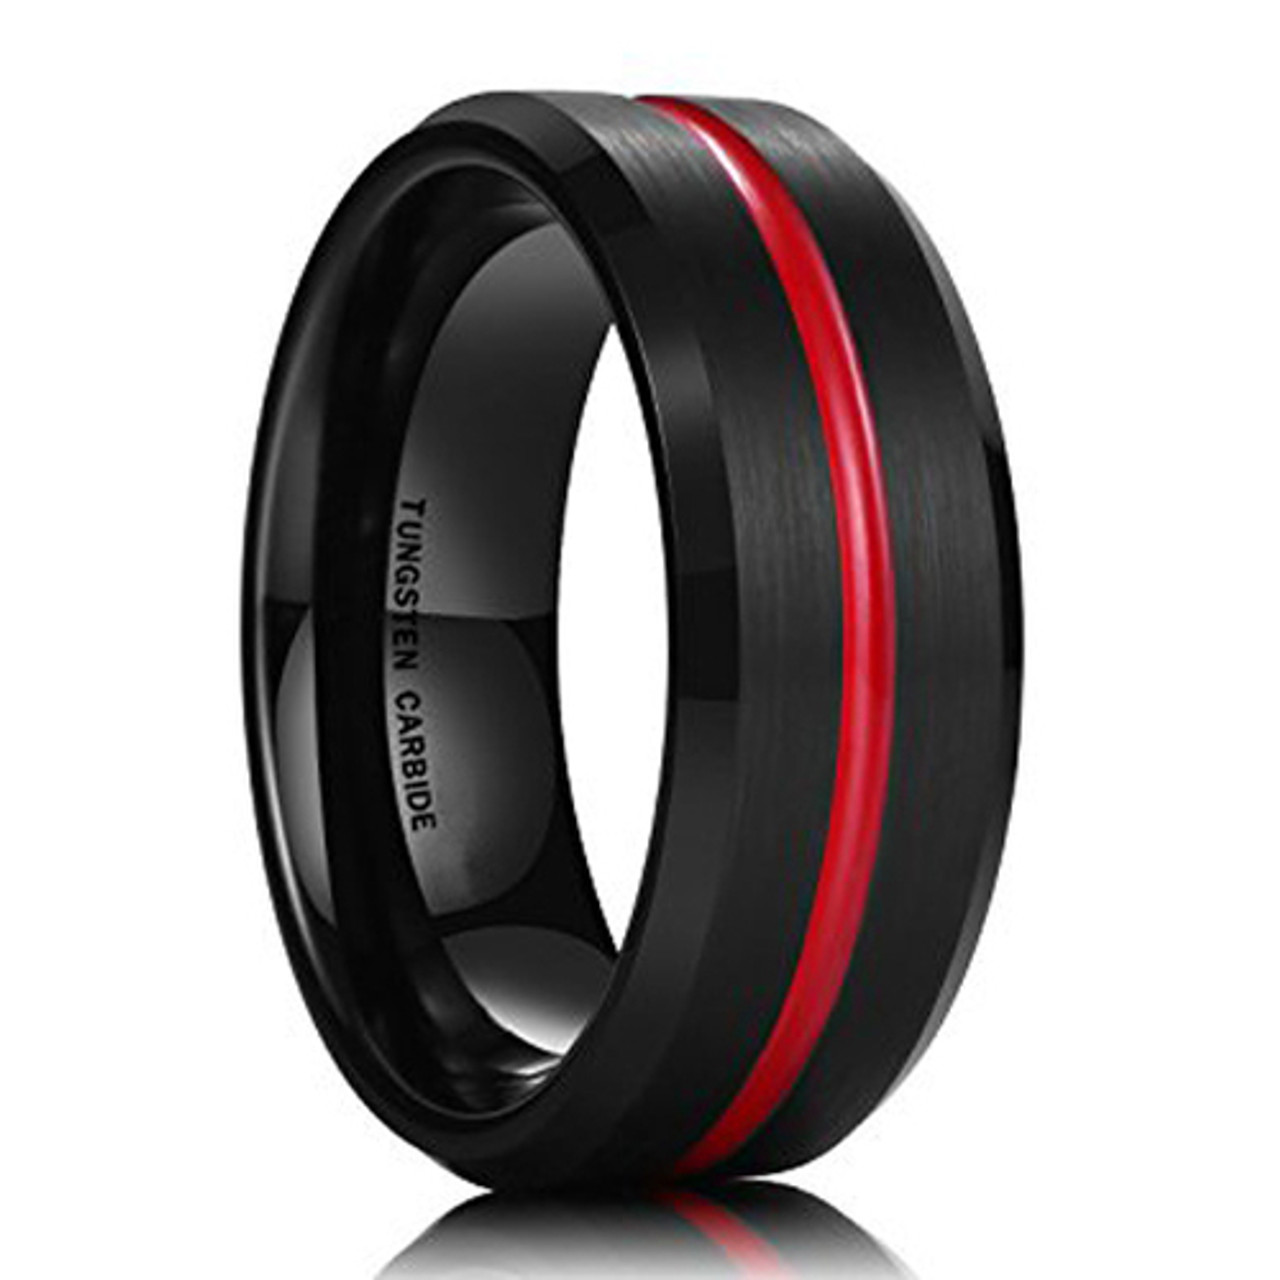 (8mm) Unisex or Men's Tungsten carbide Wedding ring band. Black and Red Grooved Matte Finish Ring with Beveled Edges.